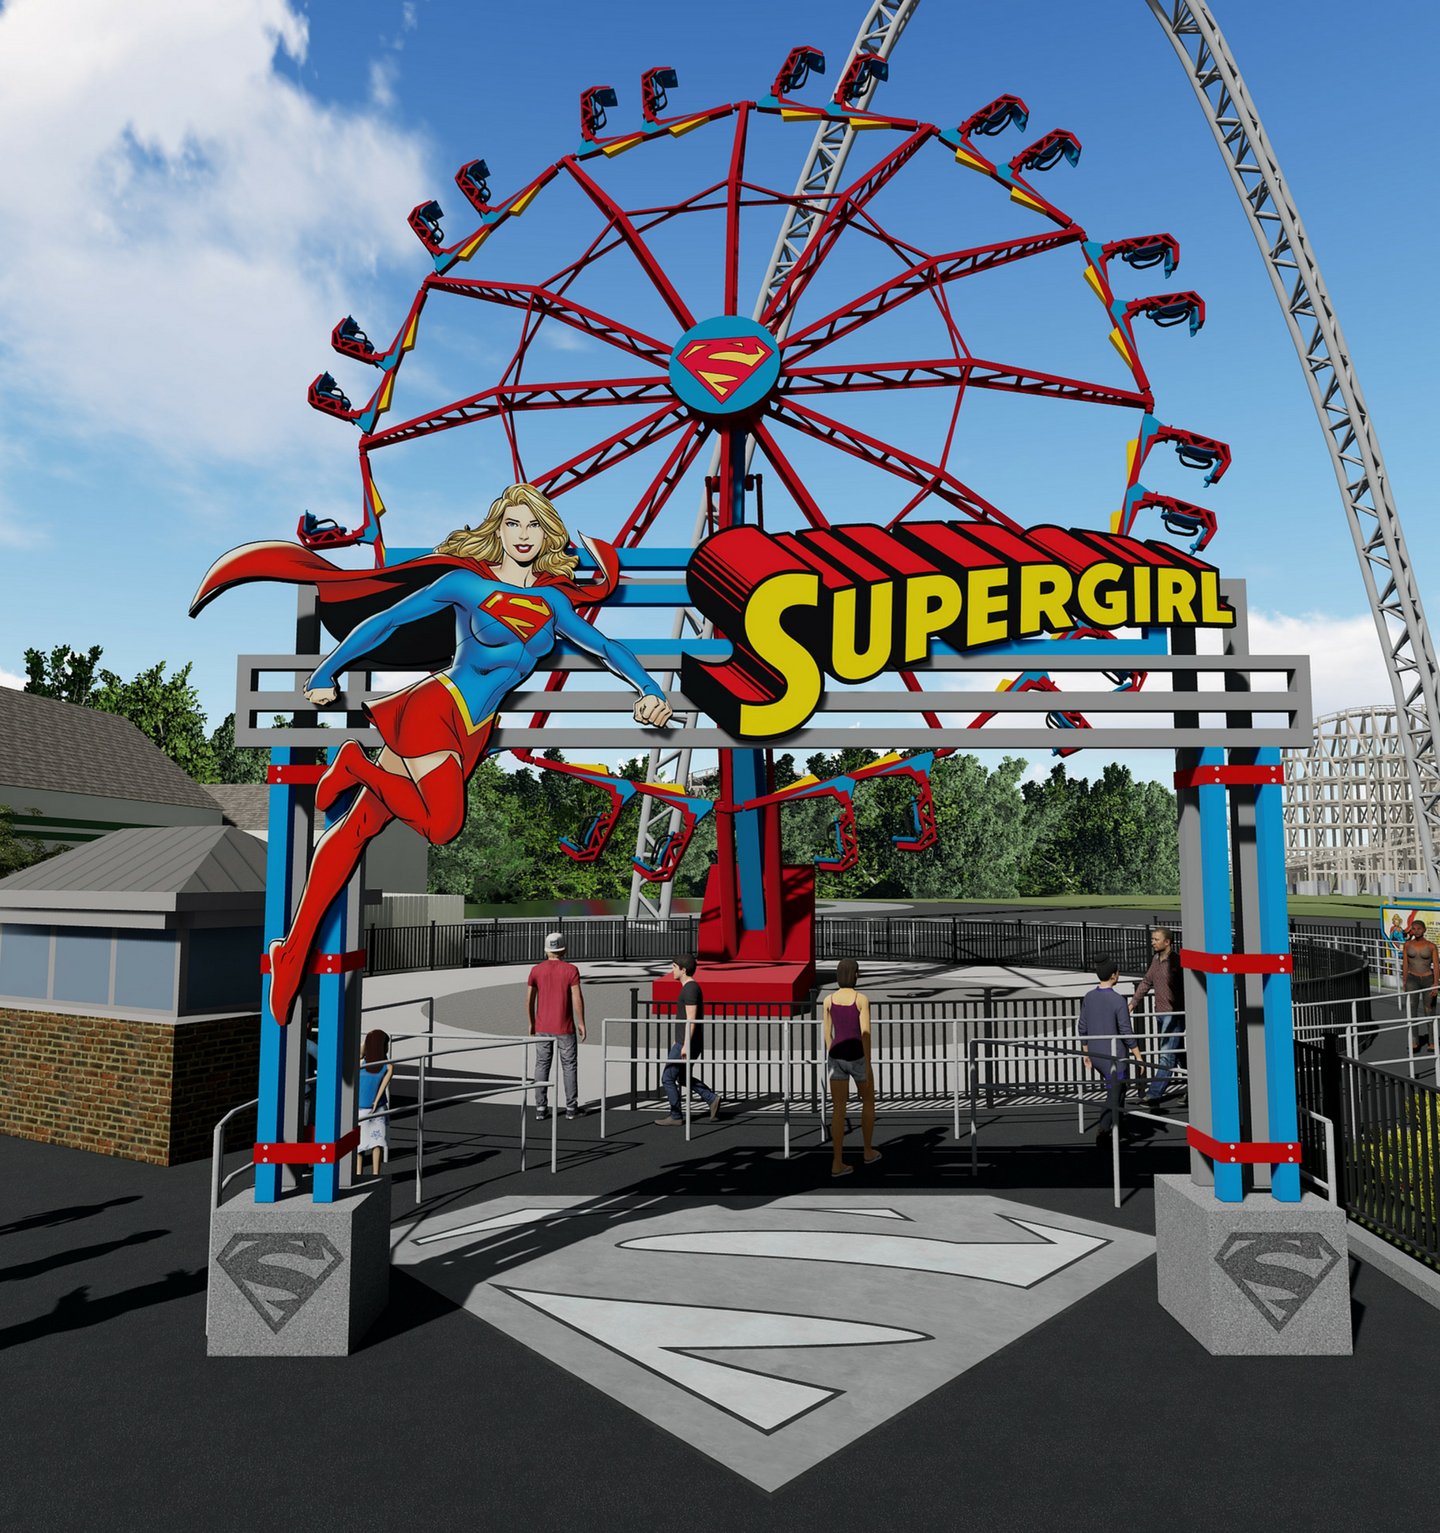 NewsPlusNotes: New Flat Rides to Twirl and Spin Visitors at Several Six Flags Parks in 2019